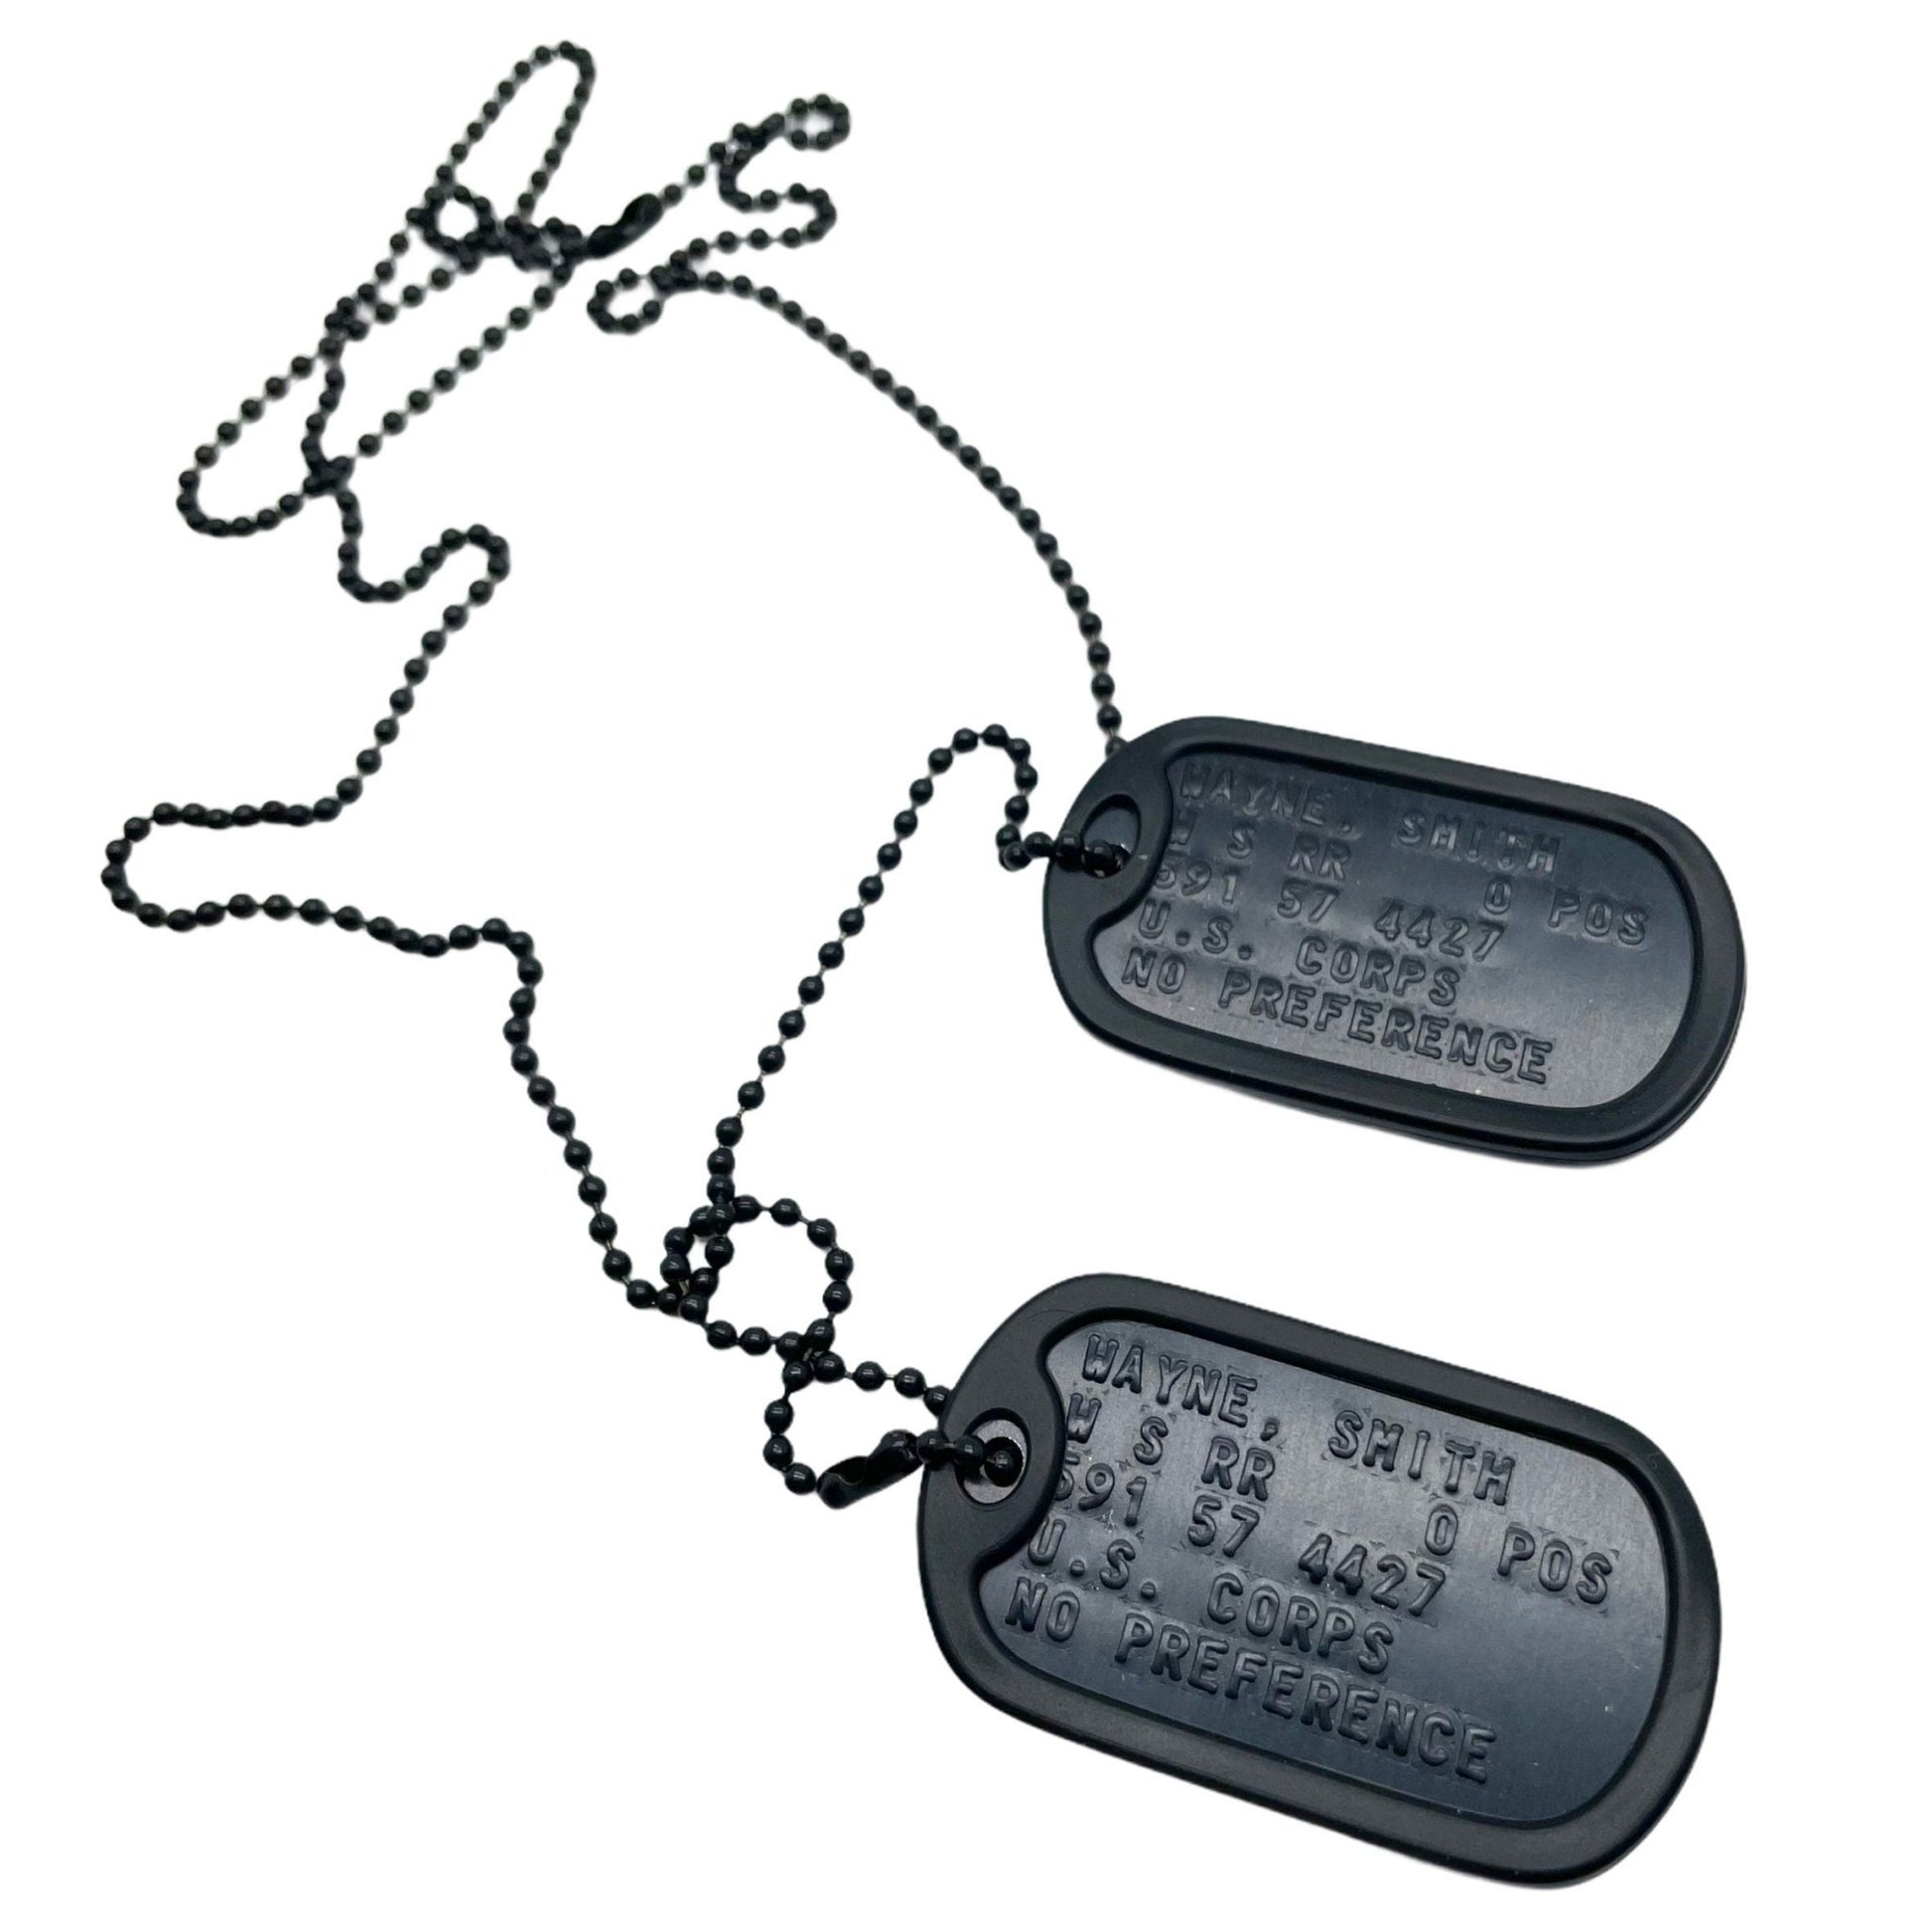 Black special forces u.s. military set personalised army dog tags anodized aluminium - chain & silencer included - made to order - TheDogTagCo